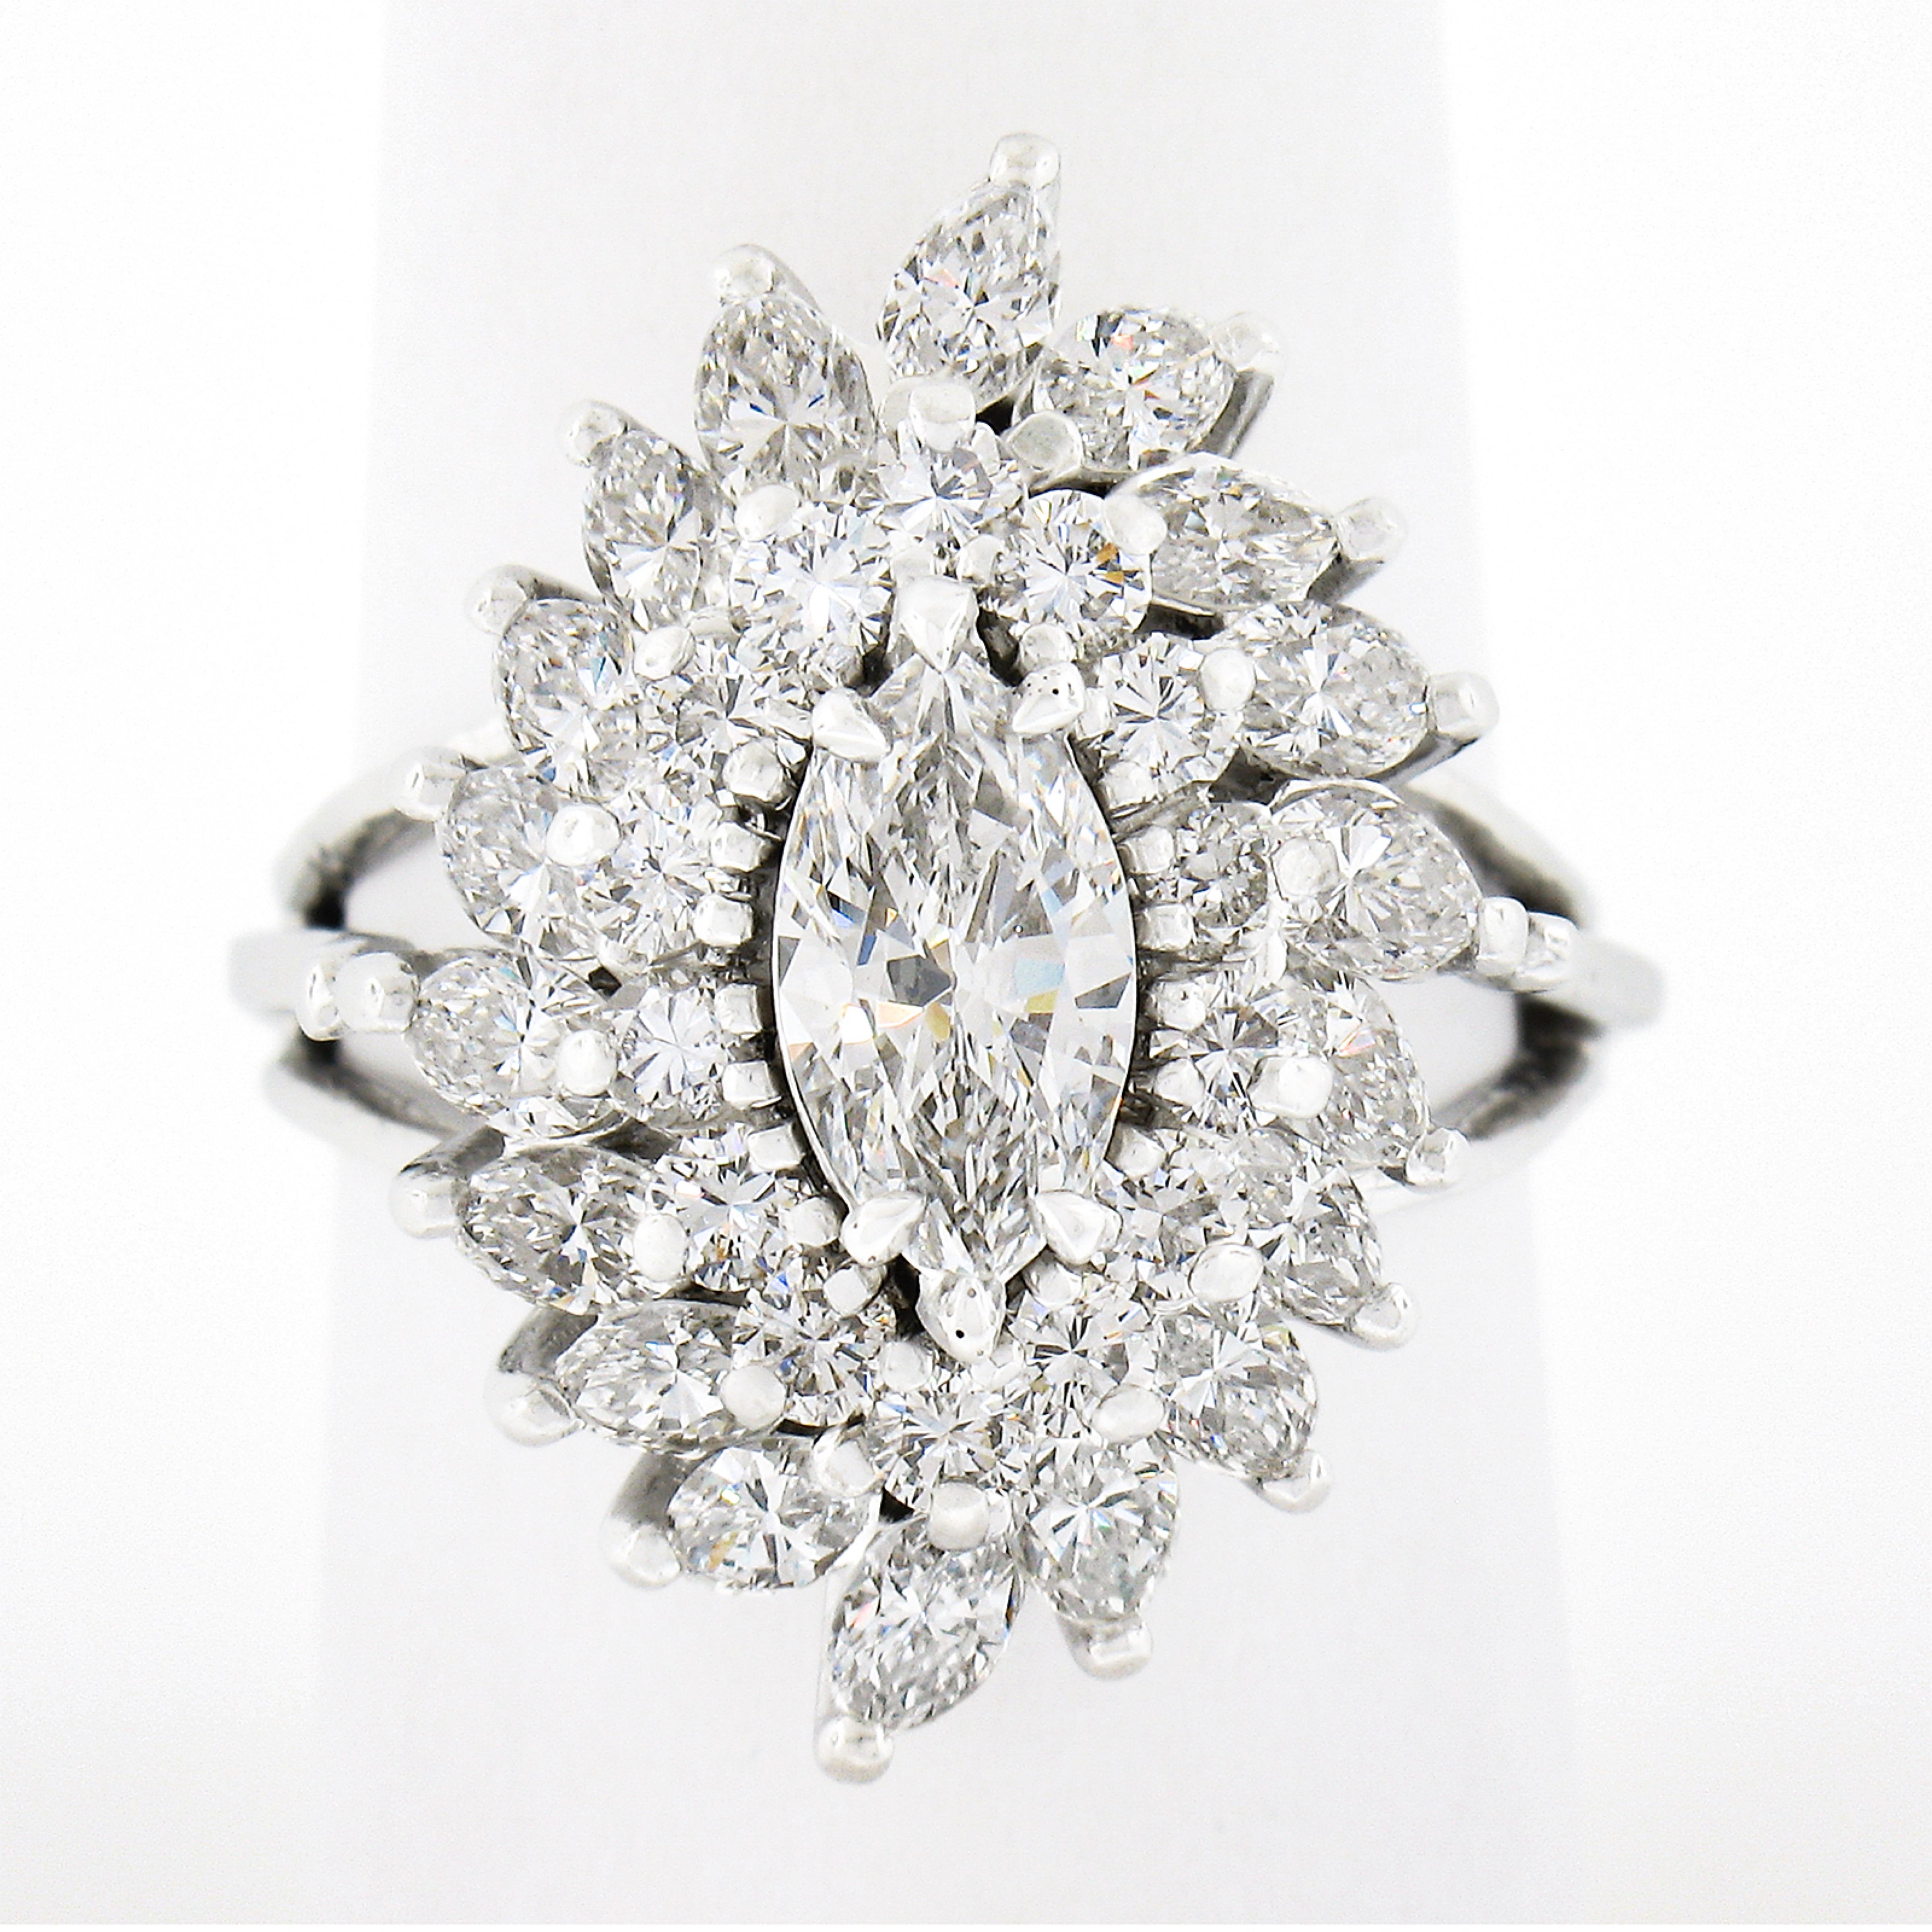 This truly jaw dropping engagement or cocktail diamond ring is crafted in solid platinum and is completely drenched in TOP QUALITY diamonds throughout this incredible and substantial design. It features a gorgeous, GIA certified, marquise cut